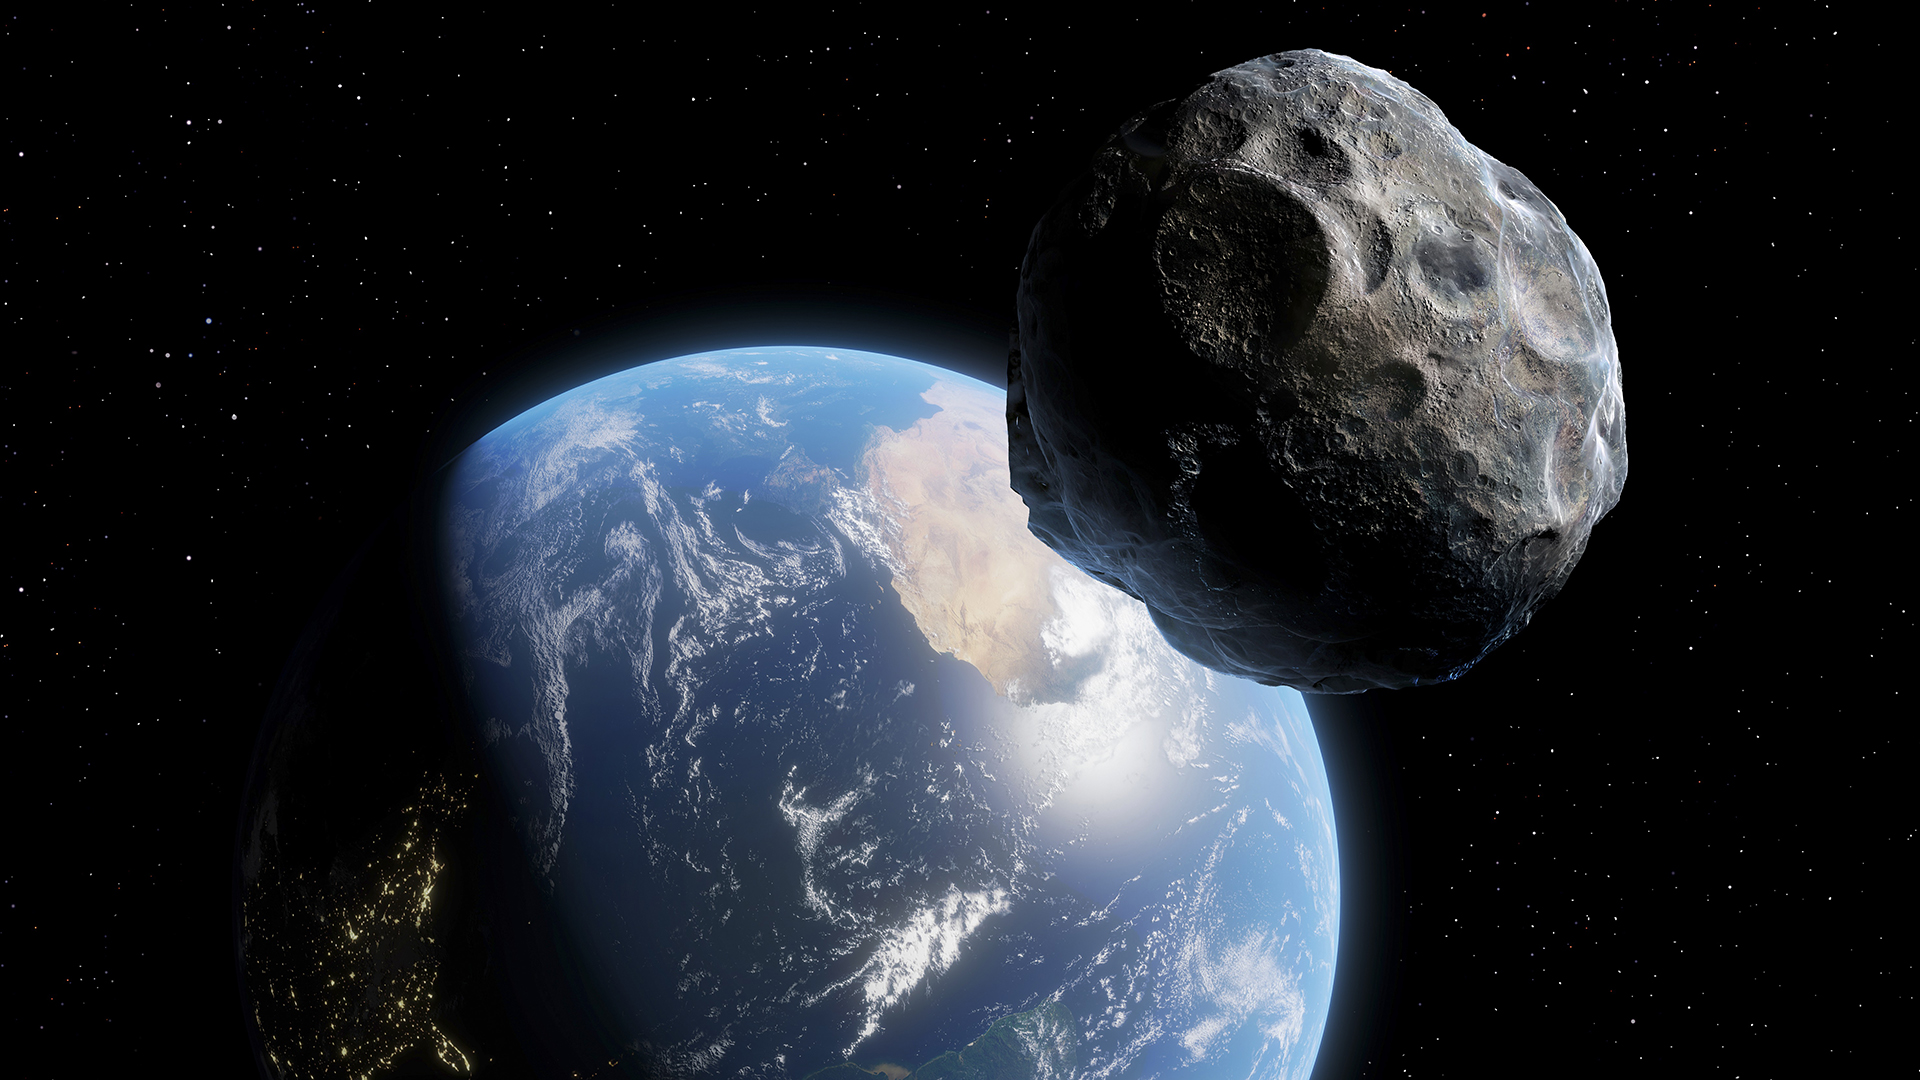 Very large space rocks that fly within 4.6 million miles (7.5 million kilometers) of Earth's solar orbit are known as potentially hazardous asteroids.